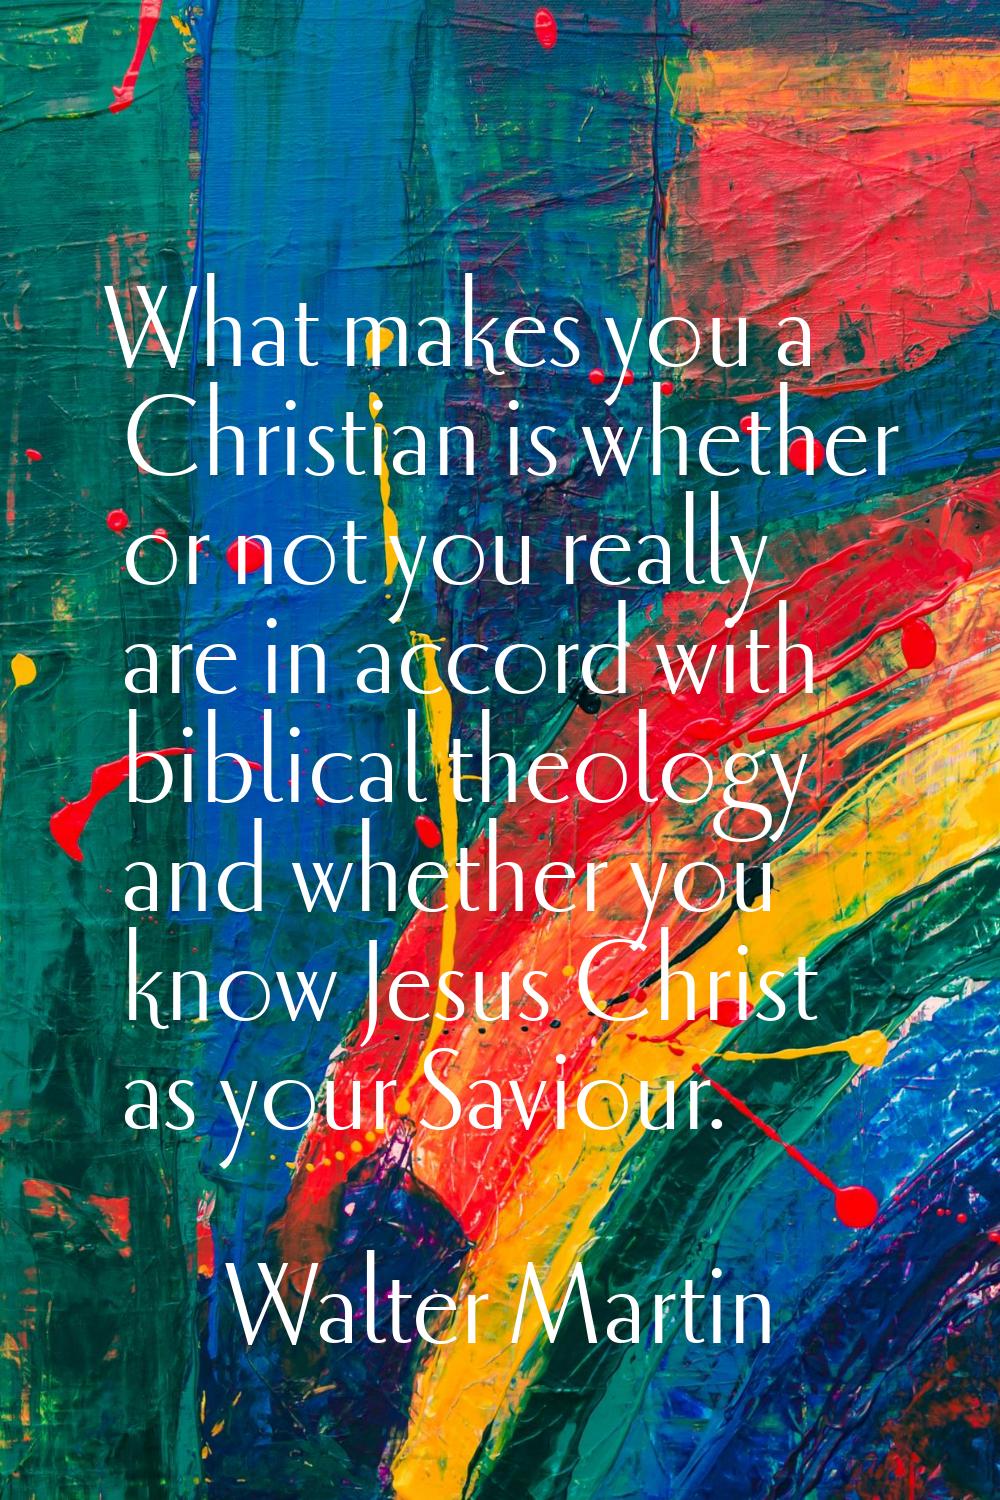 What makes you a Christian is whether or not you really are in accord with biblical theology and wh